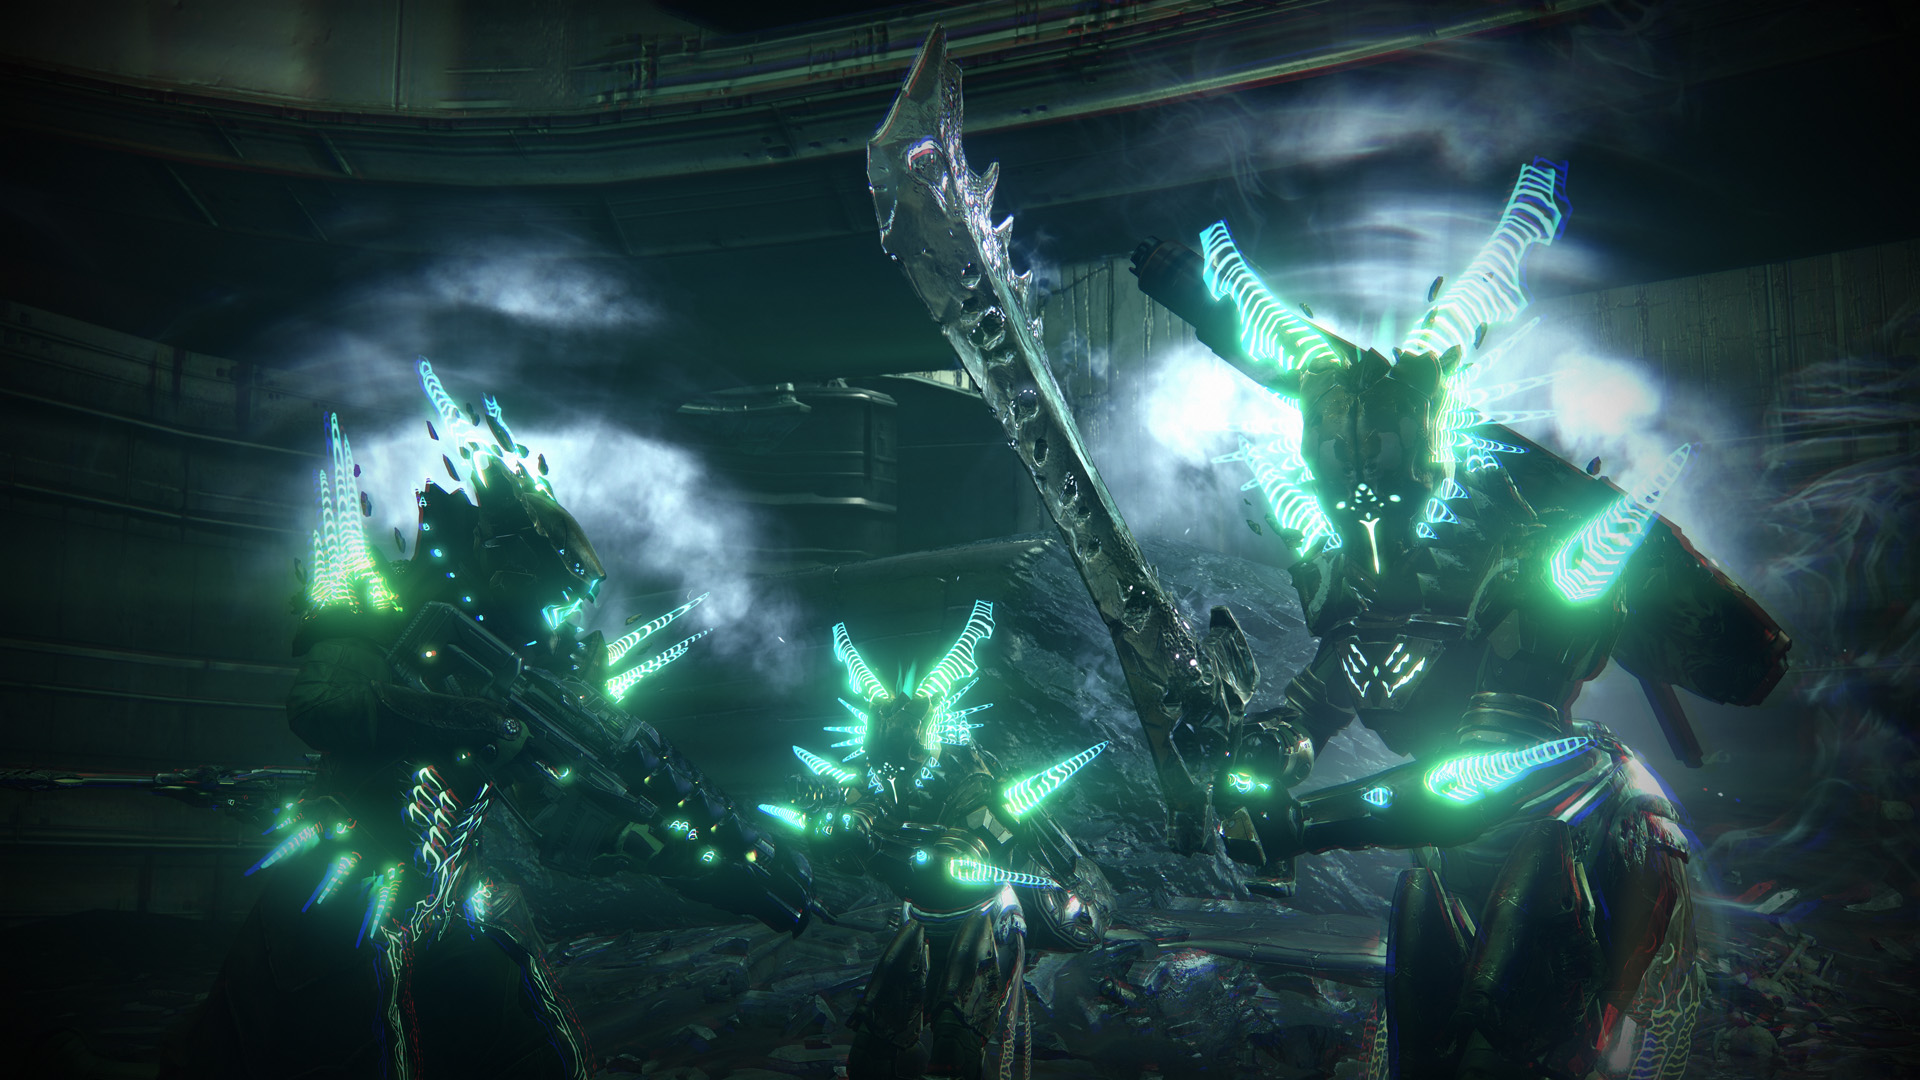 Destiny: Age of Triumph's at look at Vault of Glass, Crota's End, Shadow Thief Strike